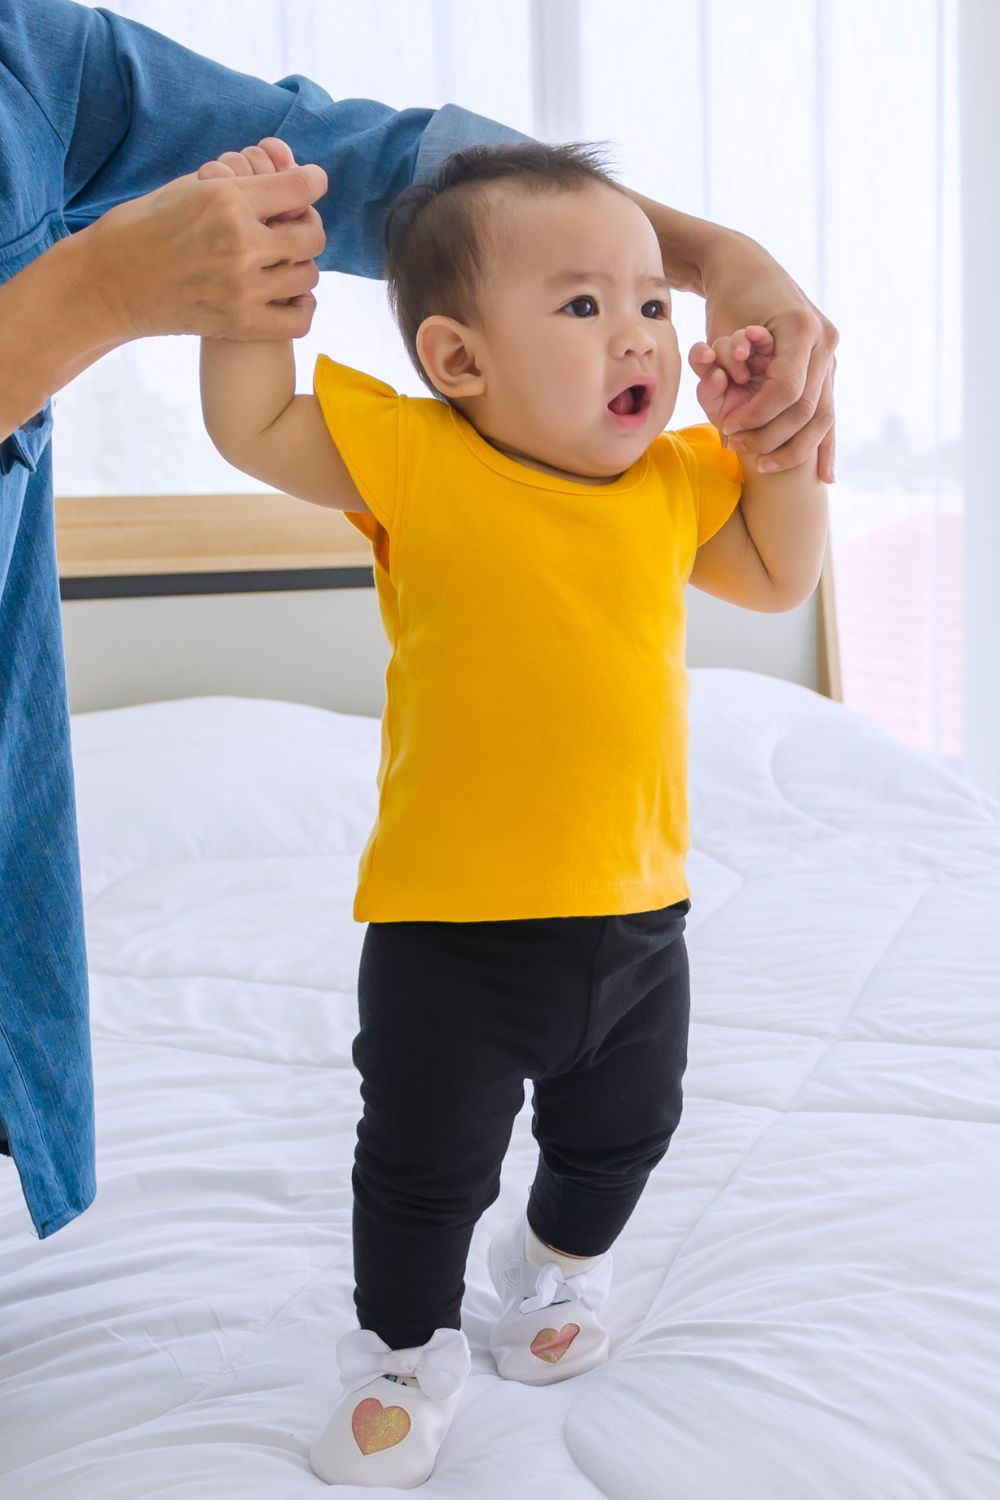 Baby learning to walk - Featured in What Are The Reasons For Delayed Walking In Babies